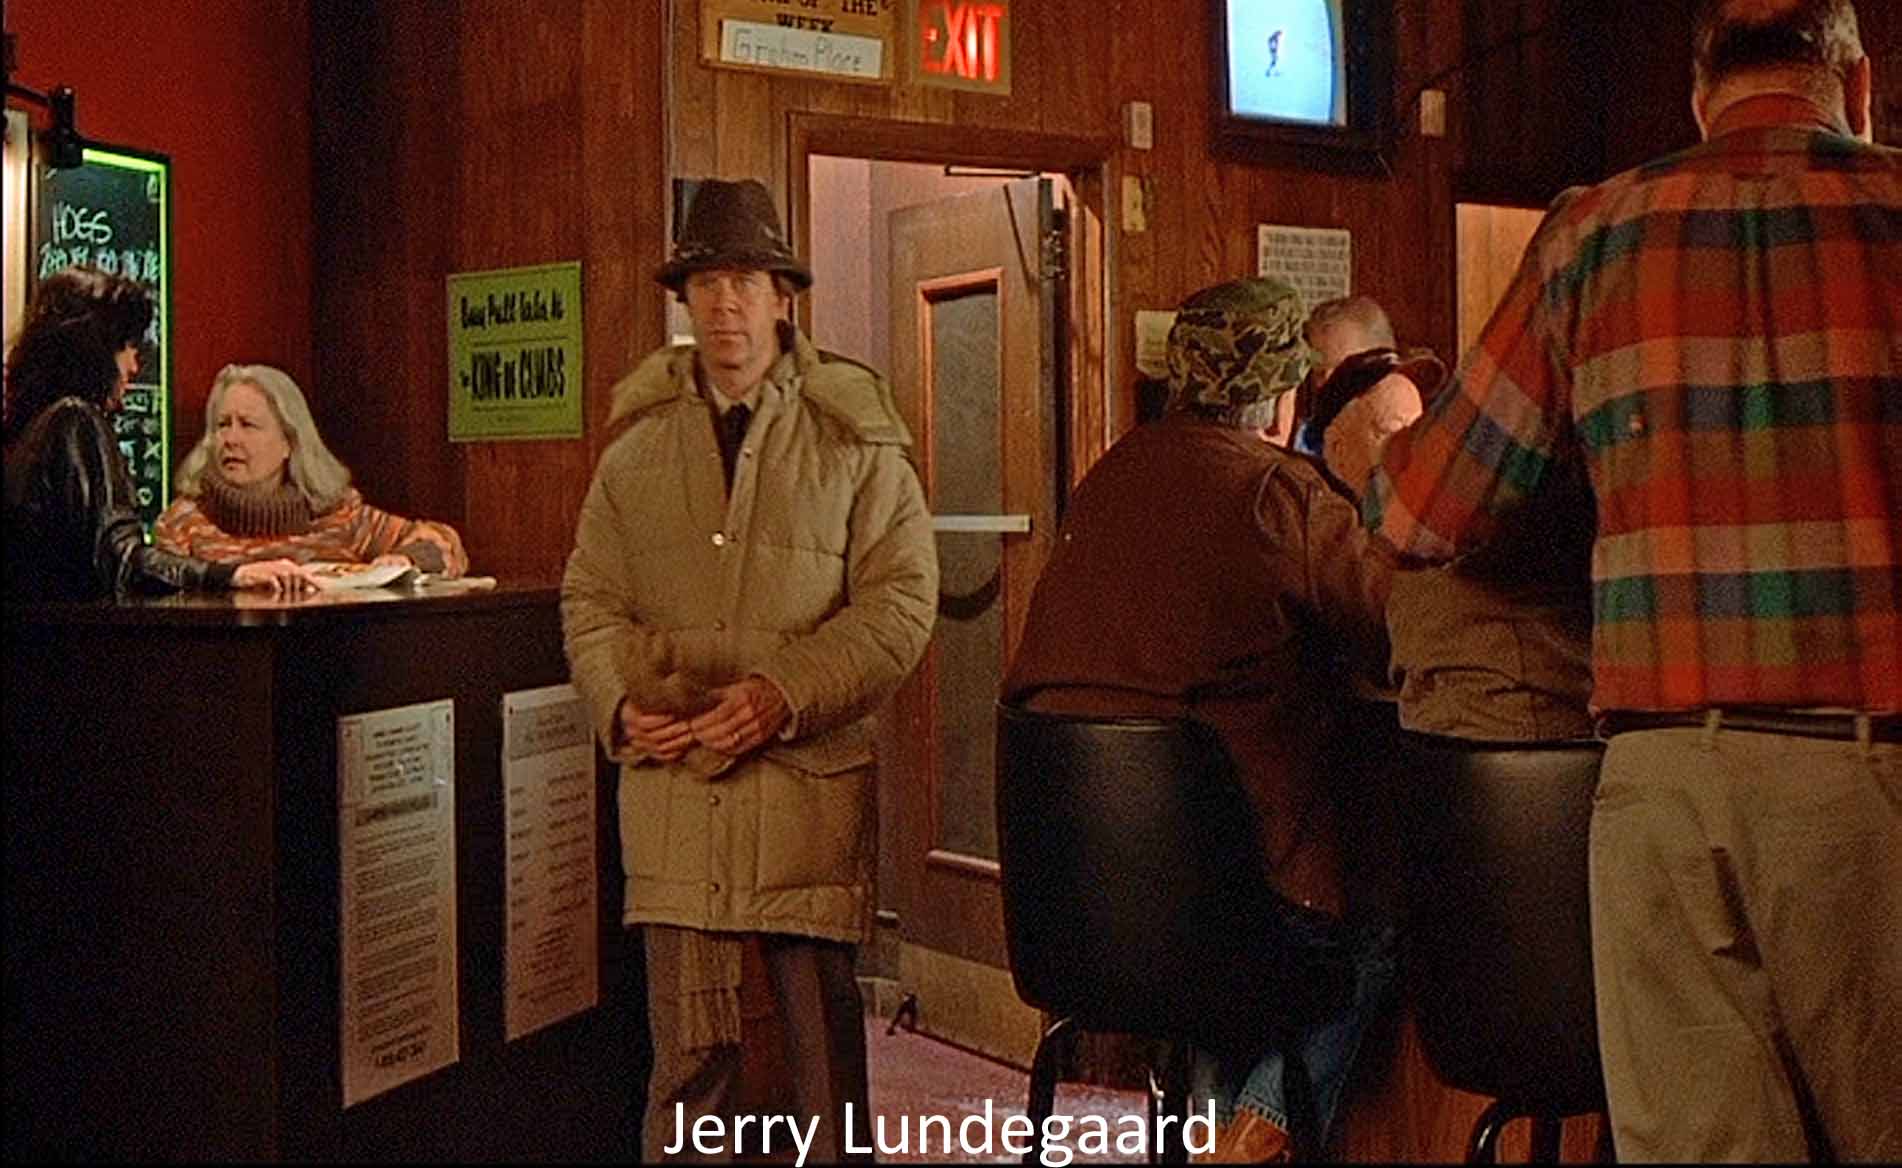 Jerry Lundegaard